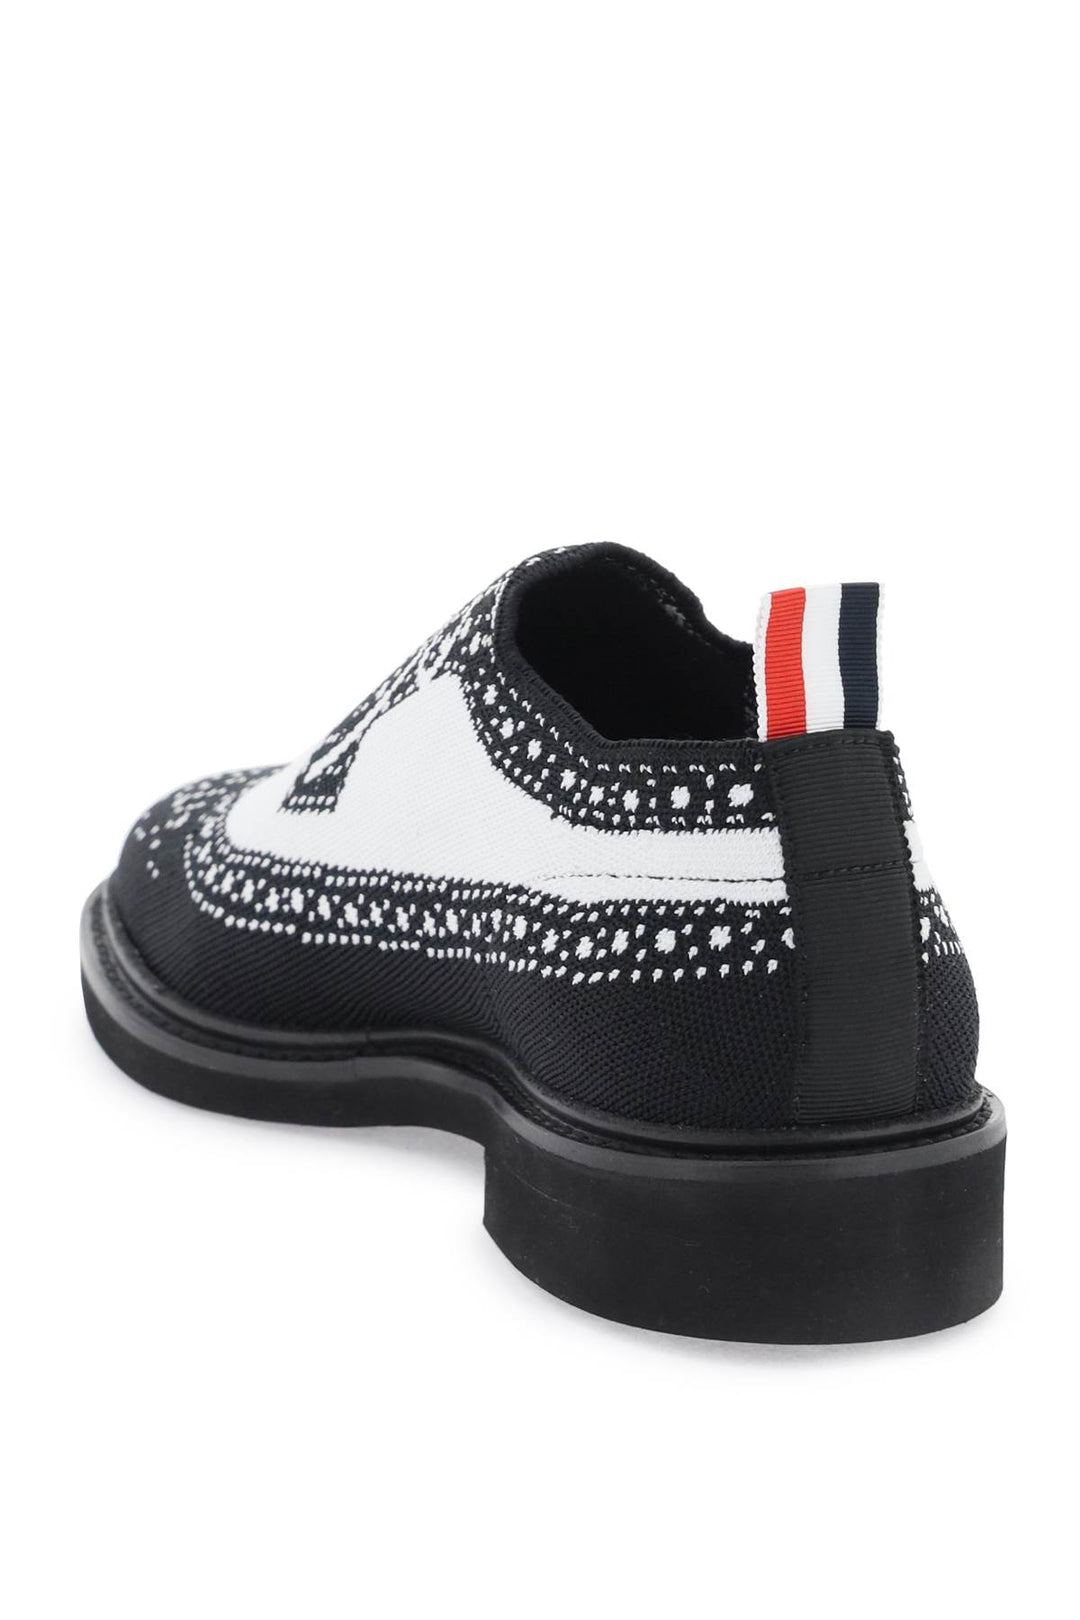 Thom Browne Longwing Brogue Loafers In Trompe L'oeil Knit   Nero